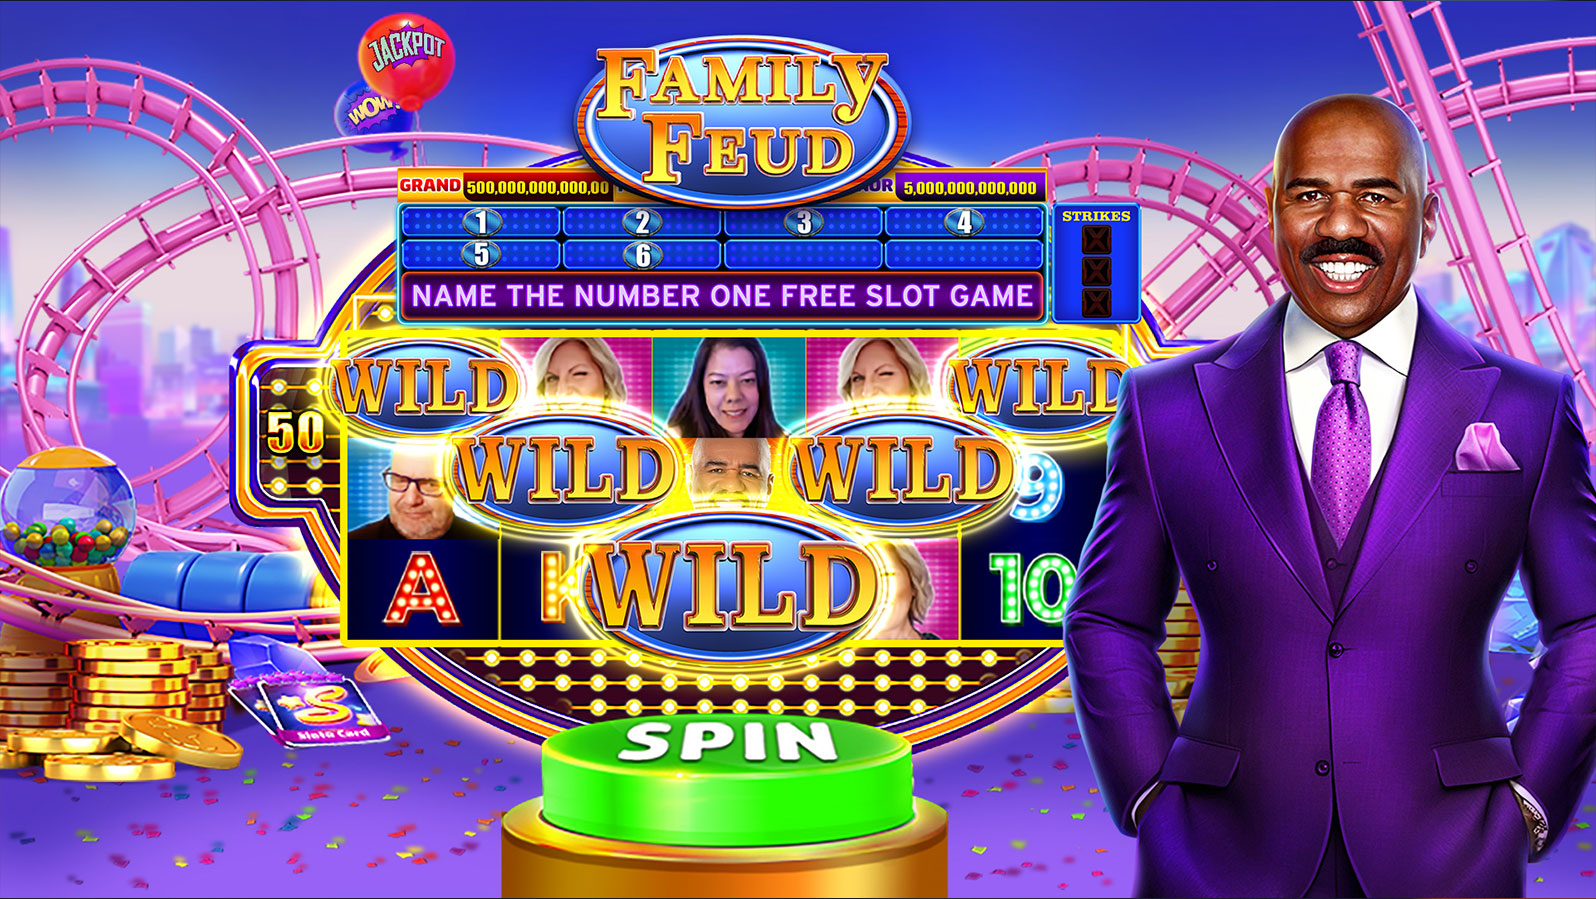 Play Family Feud for FREE on Slotomania!